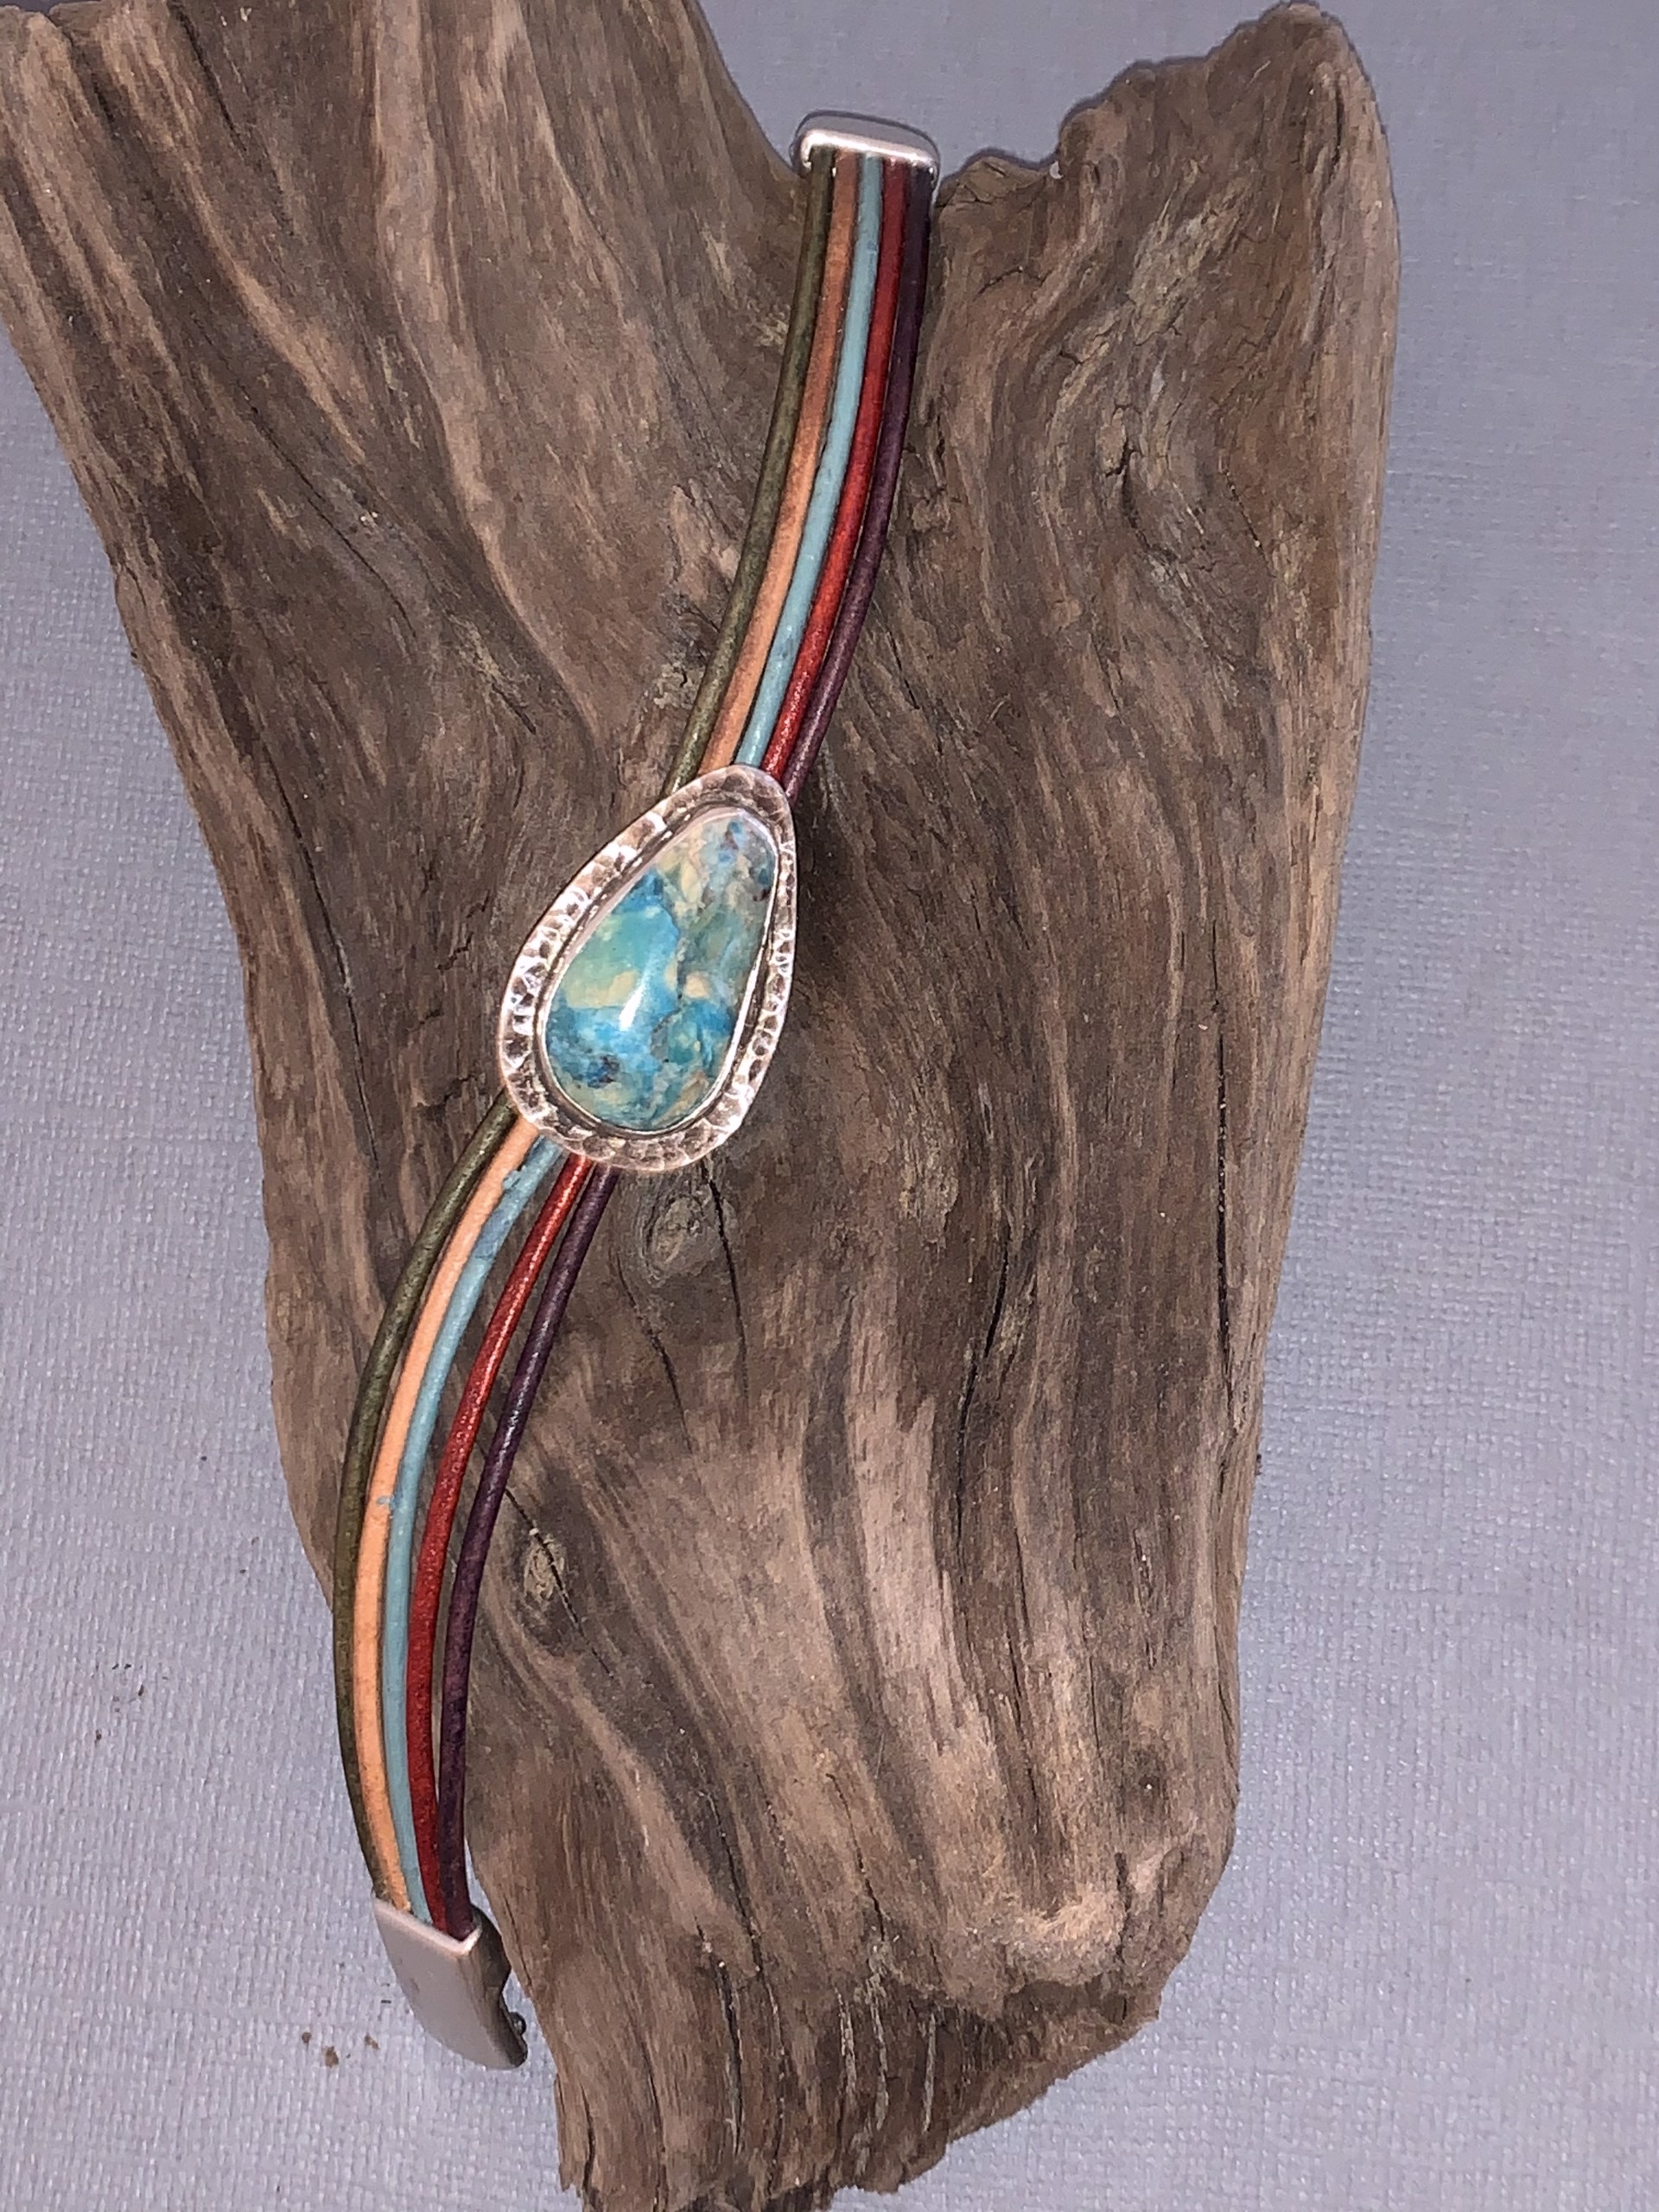 Bracelet - Sonoran Turquoise, Sterling Silver, Multi-colored Leather With Magnetic Clasp  AS 060 by Amy Soldin